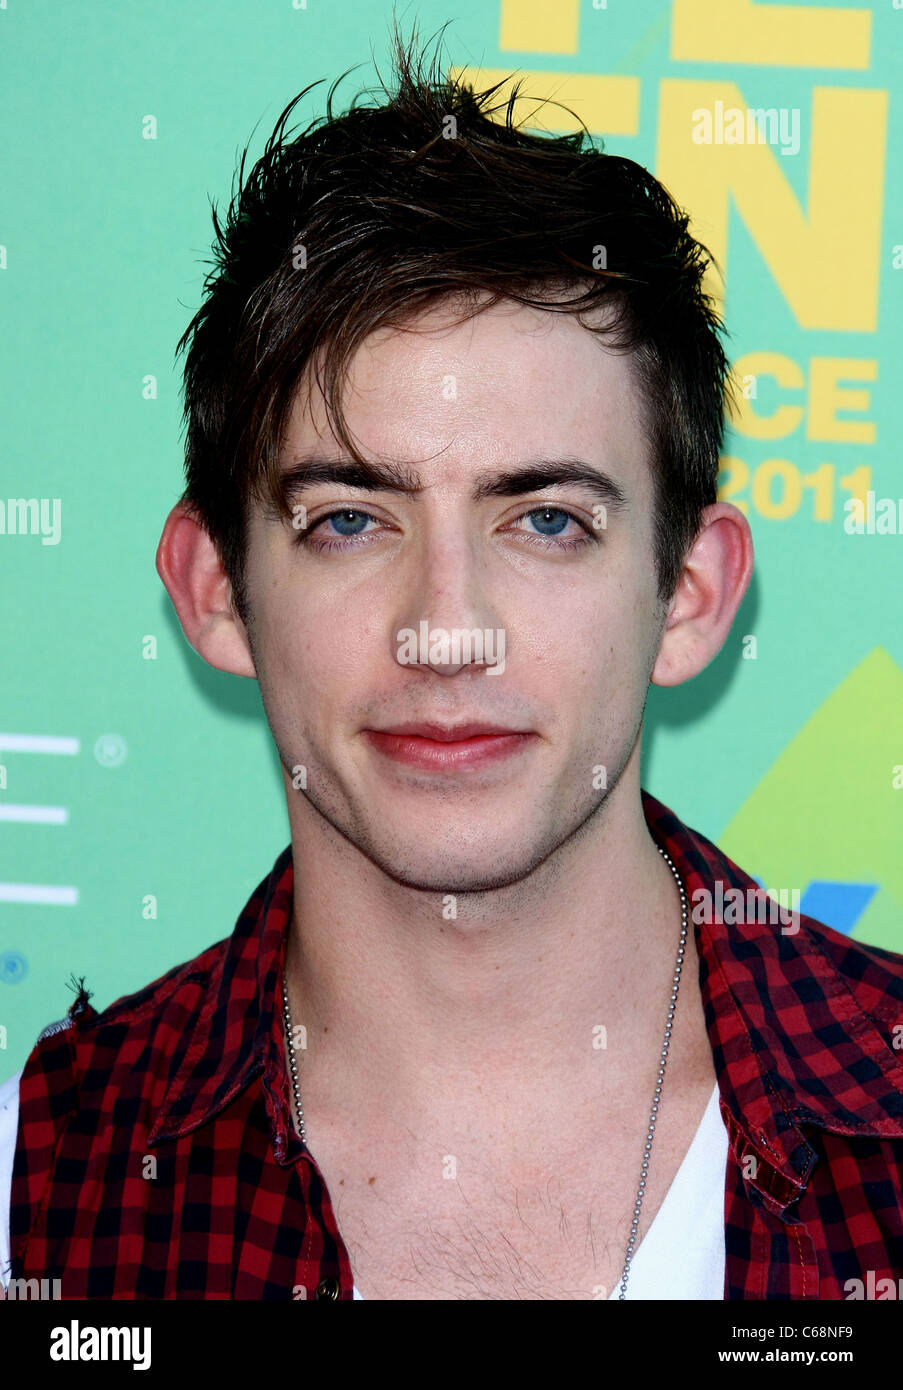 KEVIN MCHALE TEEN CHOICE 2011 ARRIVALS LOS ANGELES CALIFORNIA USA 07 August 2011 Stock Photo